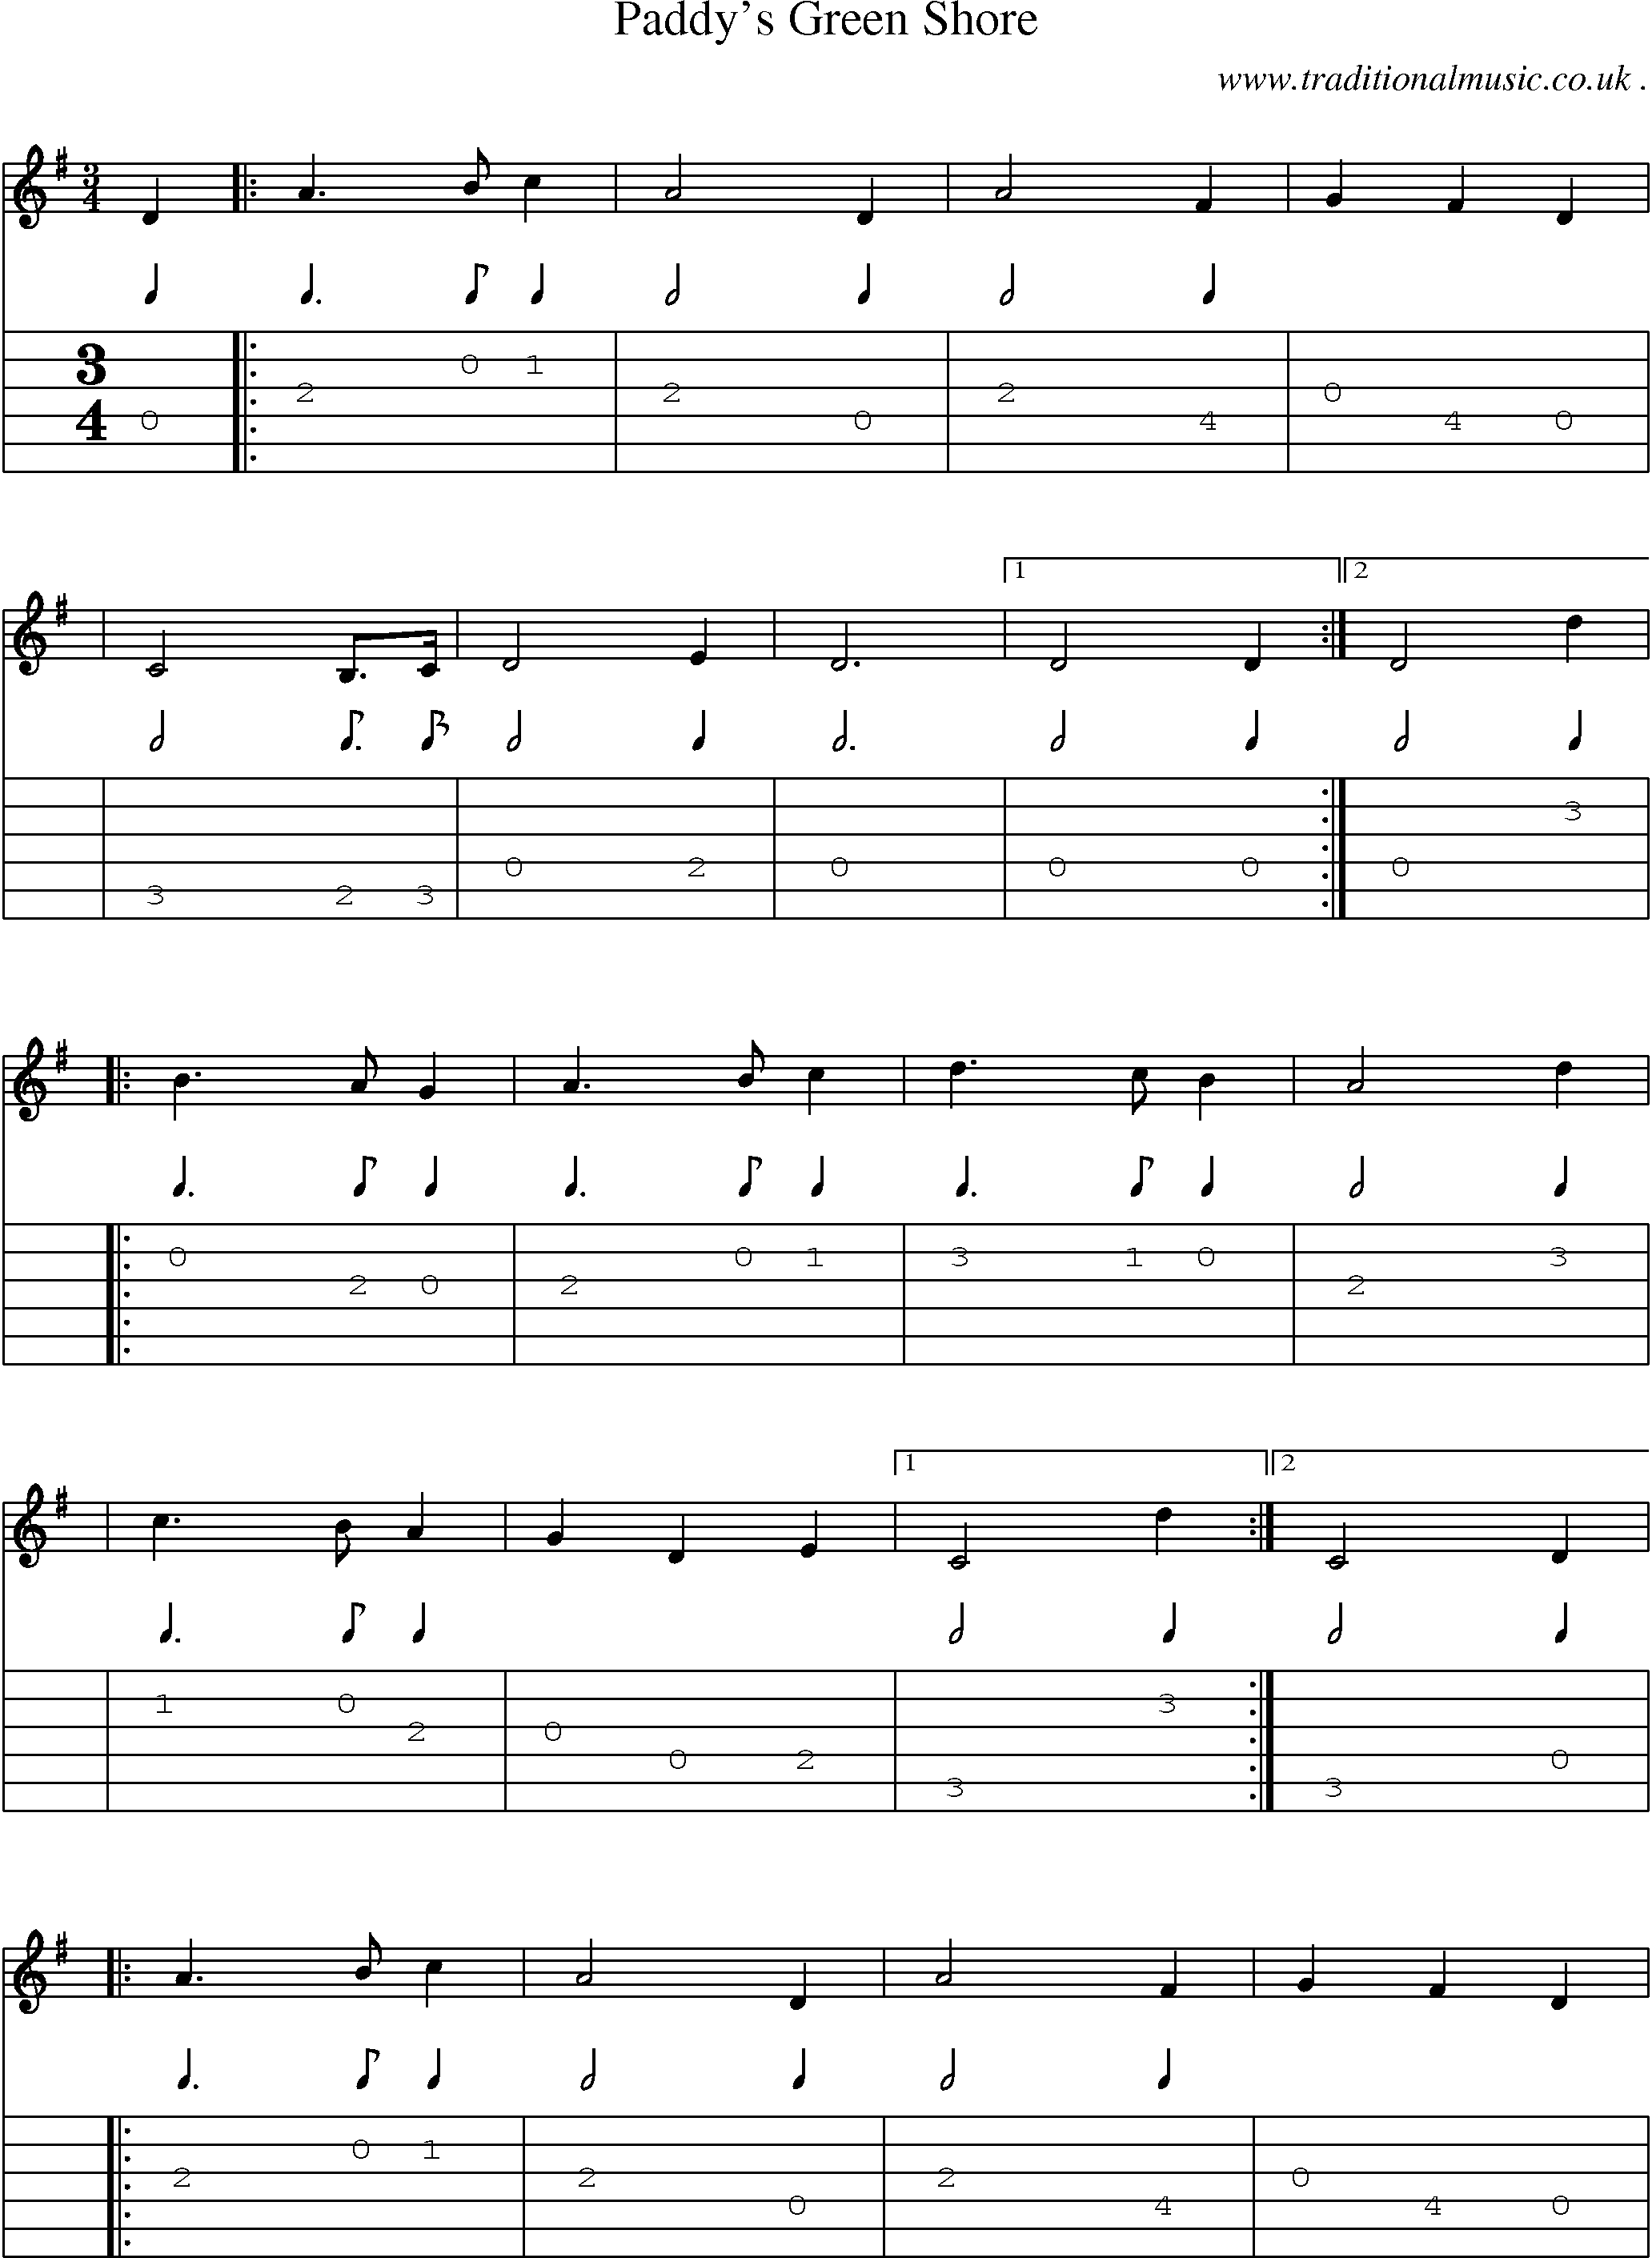 Sheet-Music and Guitar Tabs for Paddys Green Shore